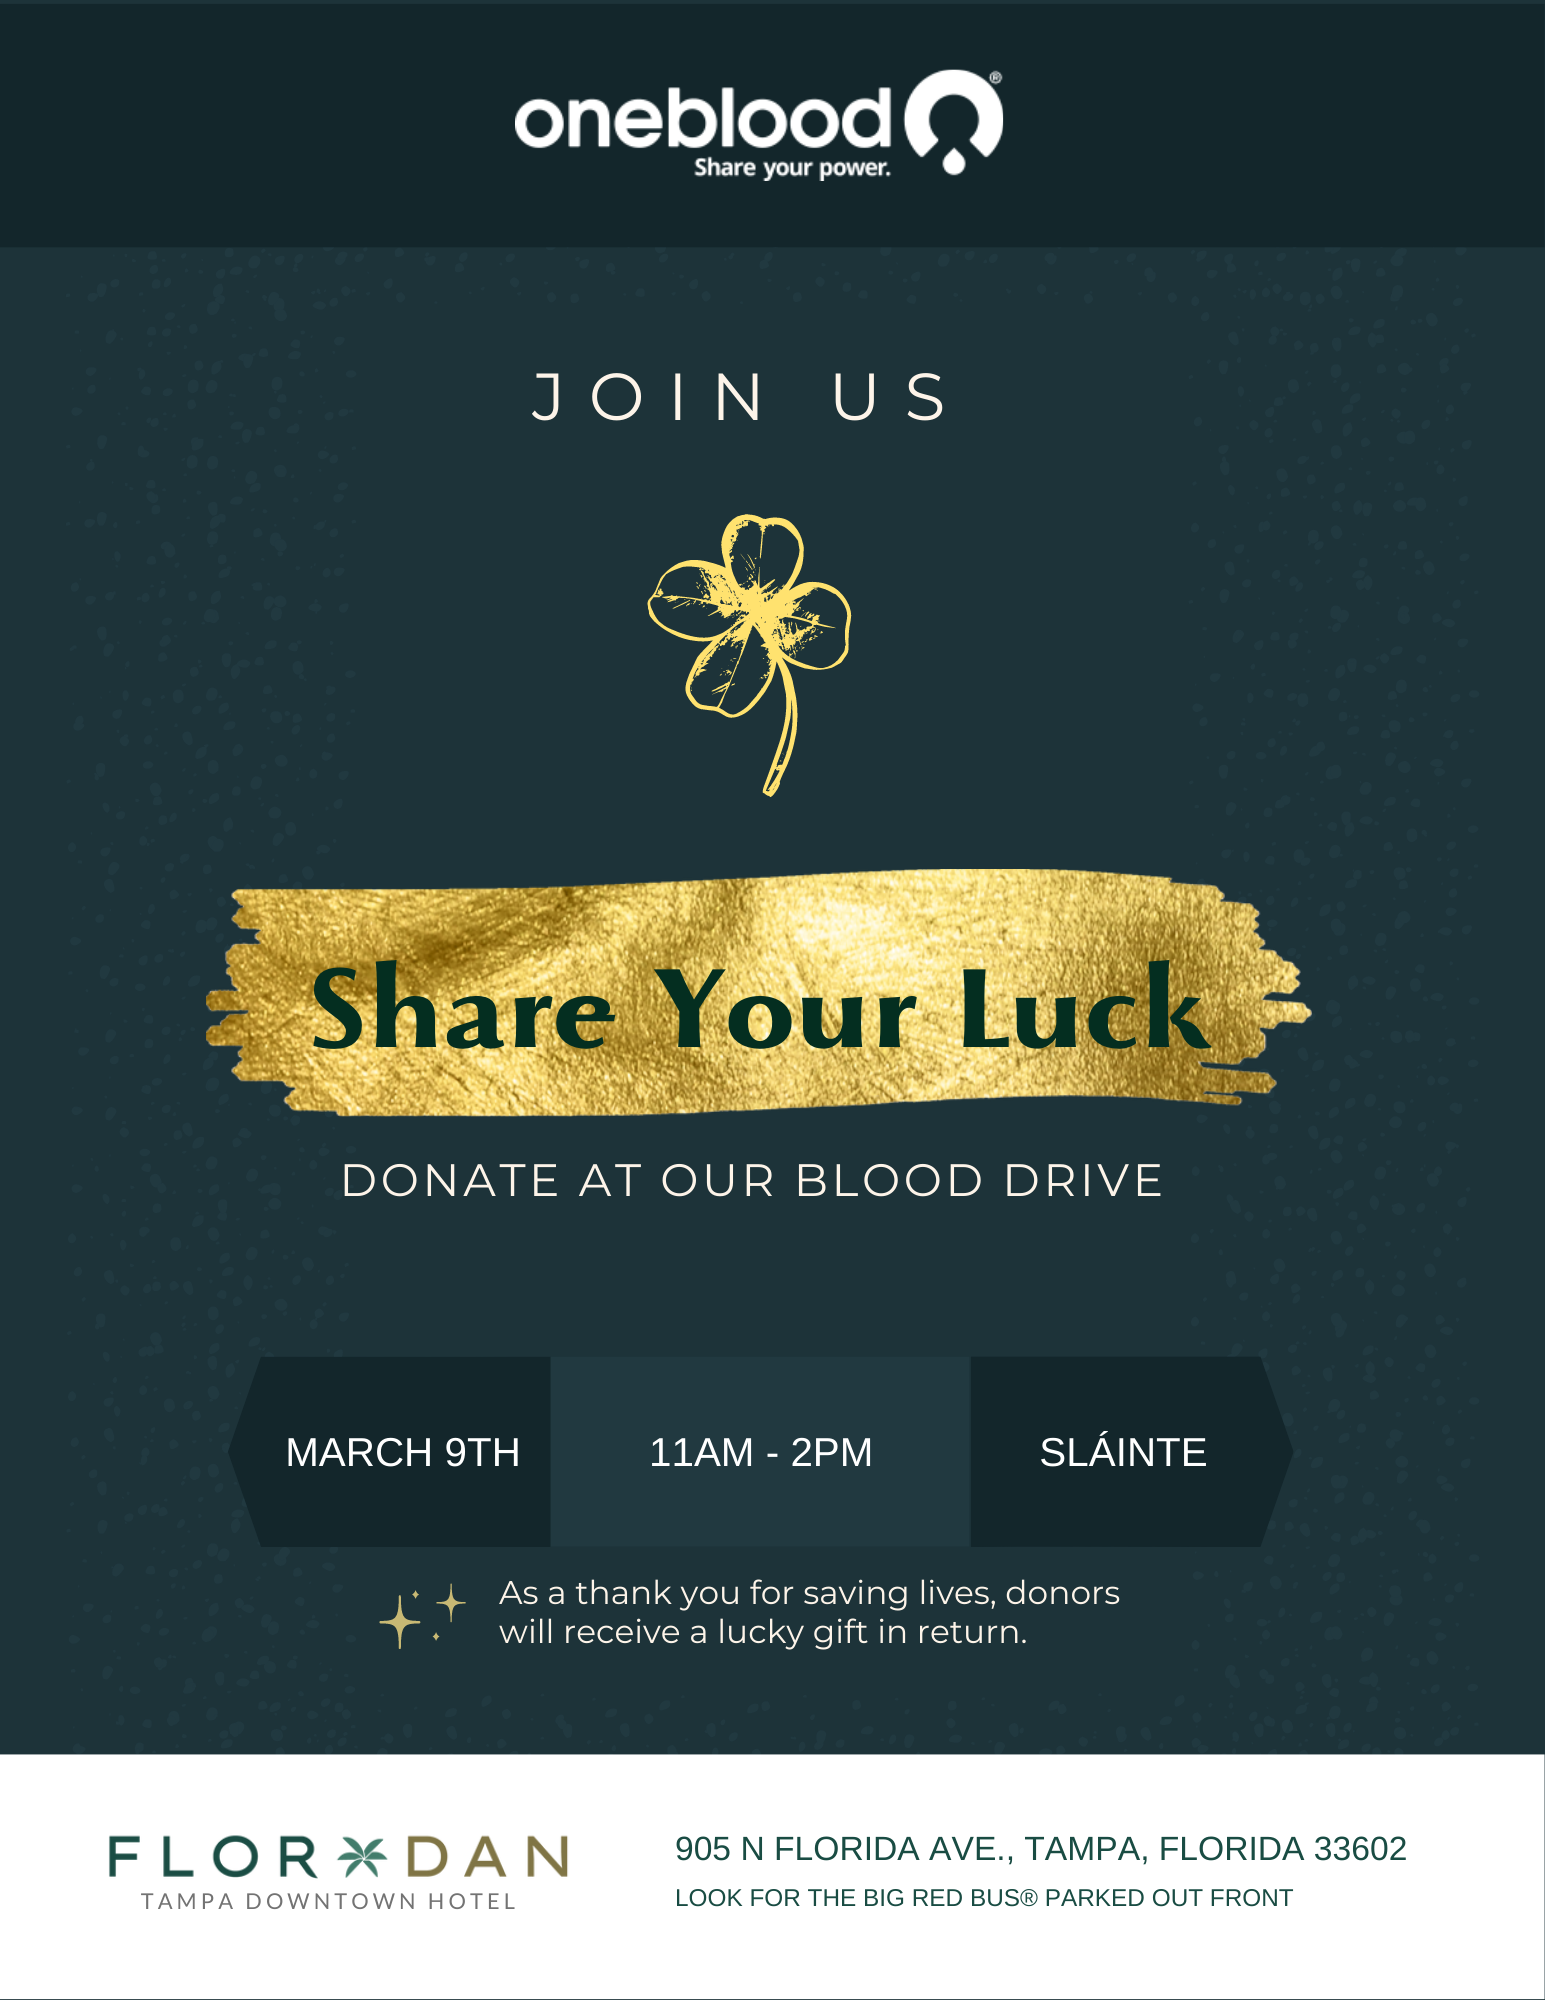 Share Your Luck with Floridan Palace & OneBlood this March